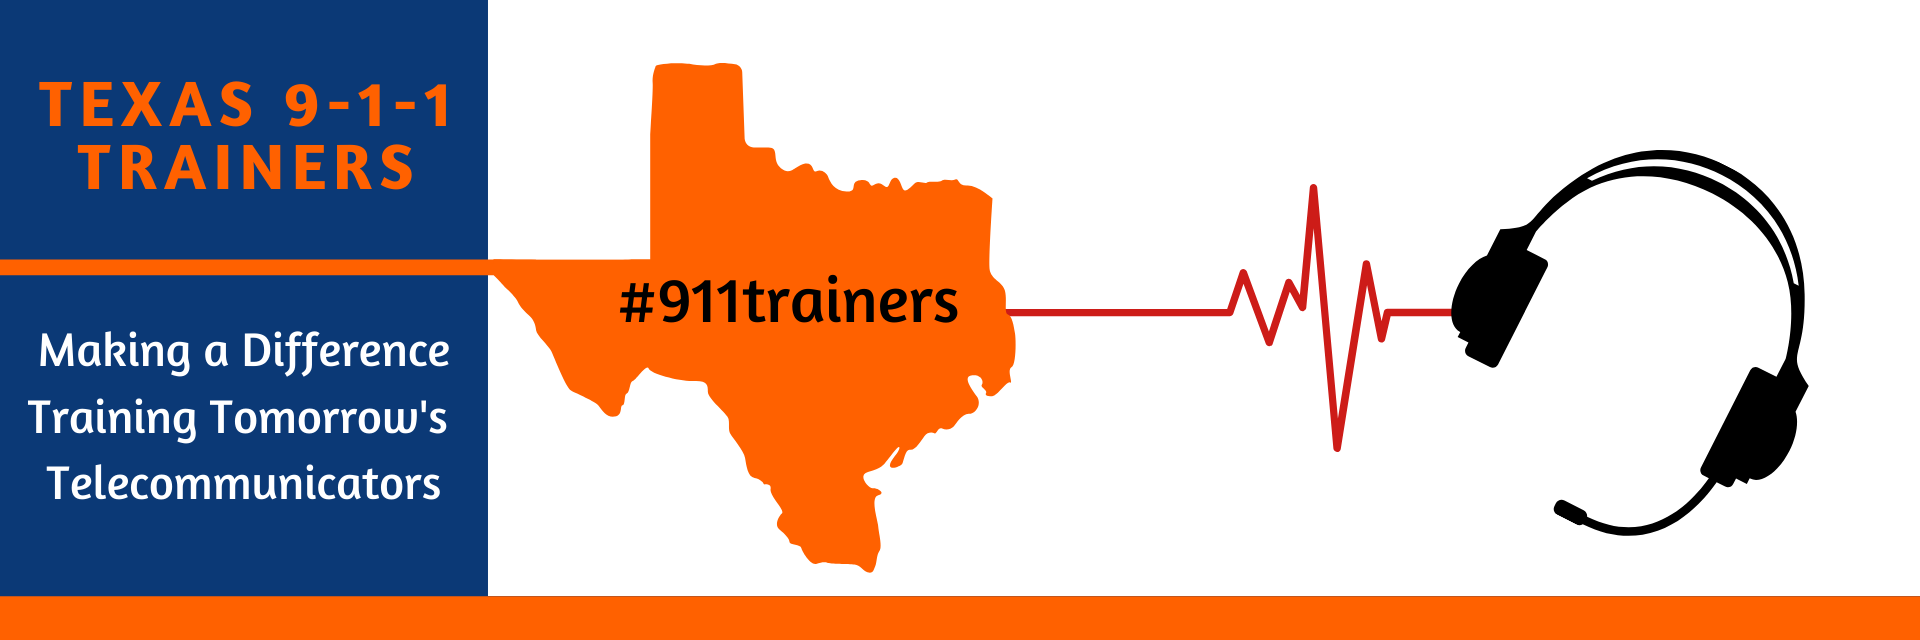 Texas 9-1-1 Trainers